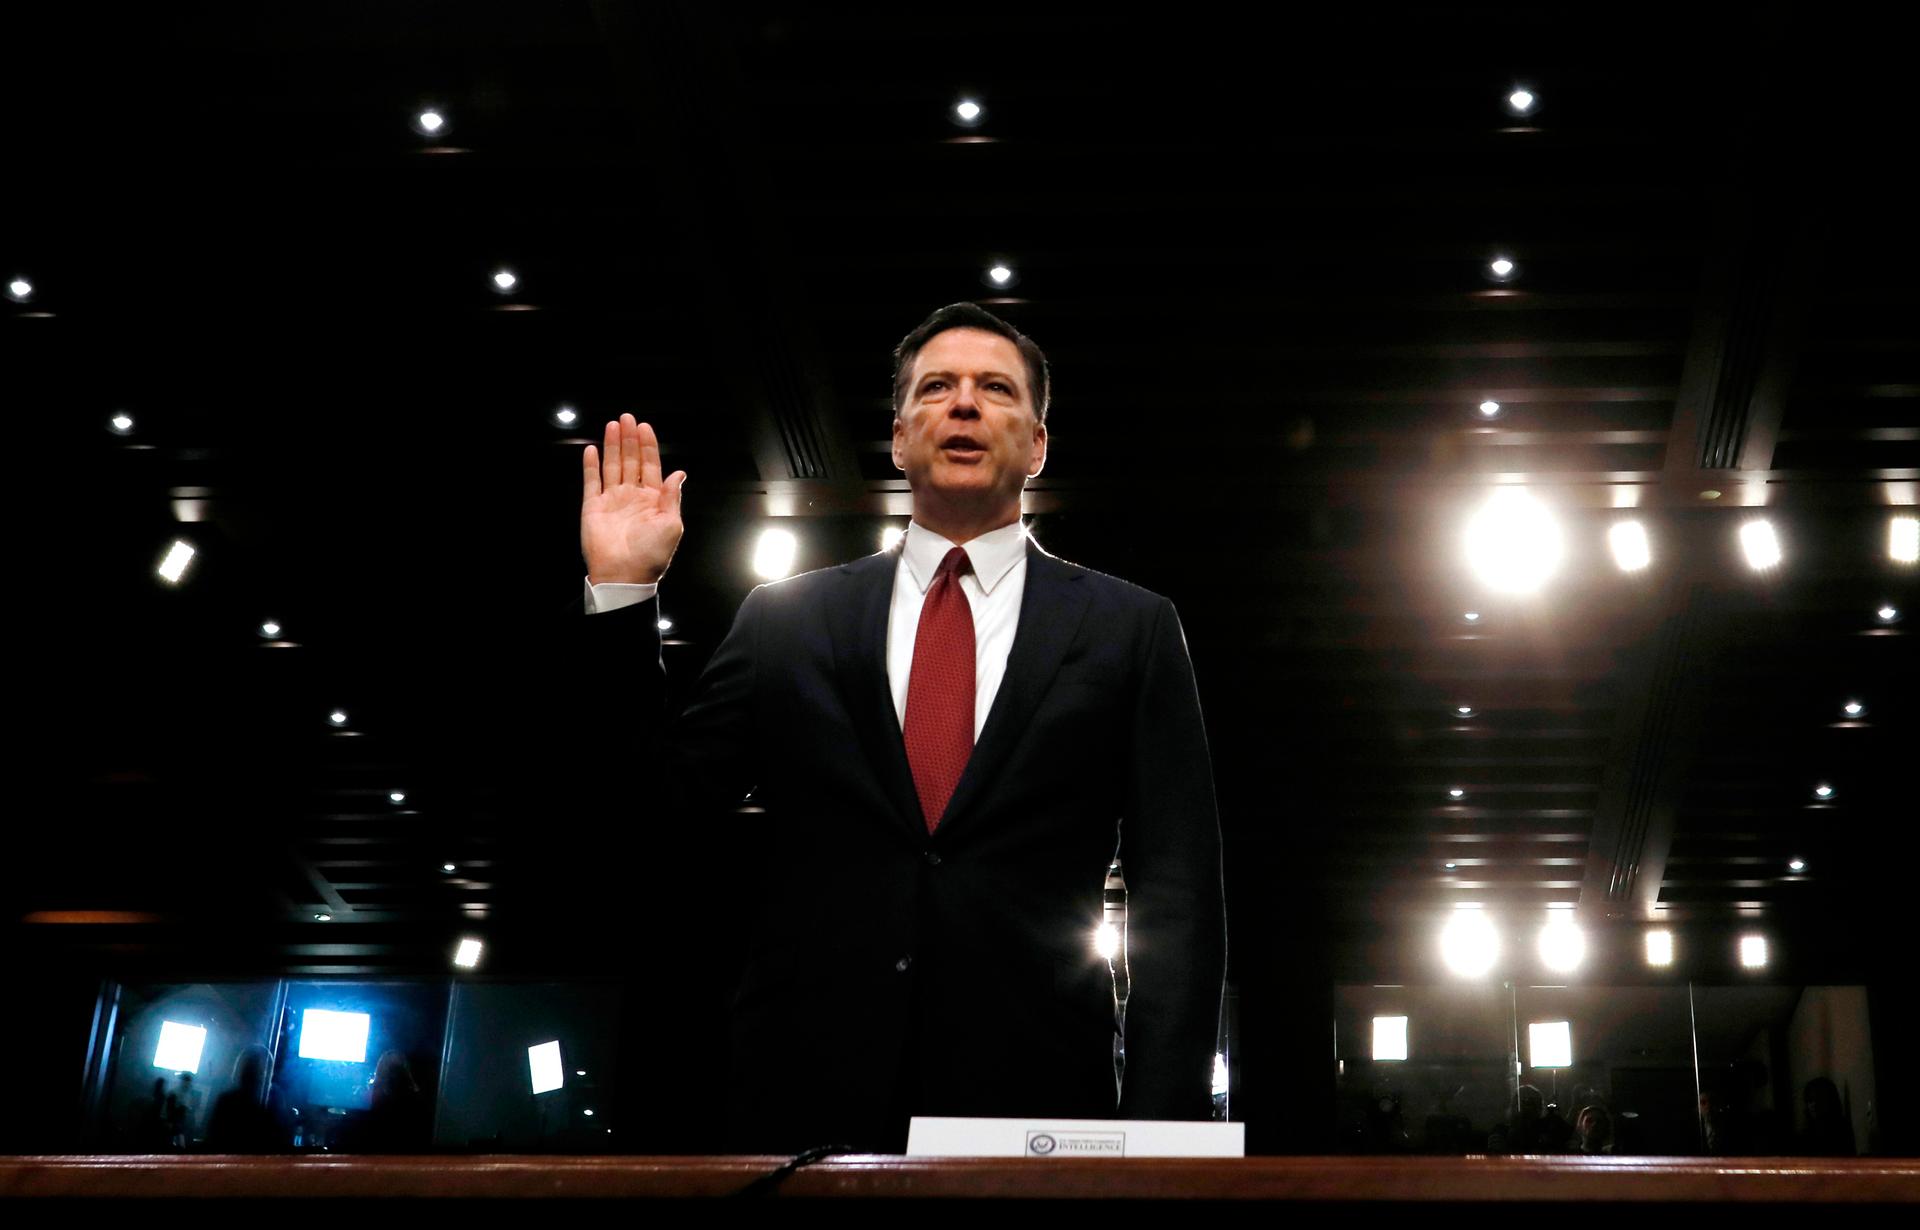 Former FBI Director James Comey is sworn in prior to testifying before a Senate Intelligence Committee